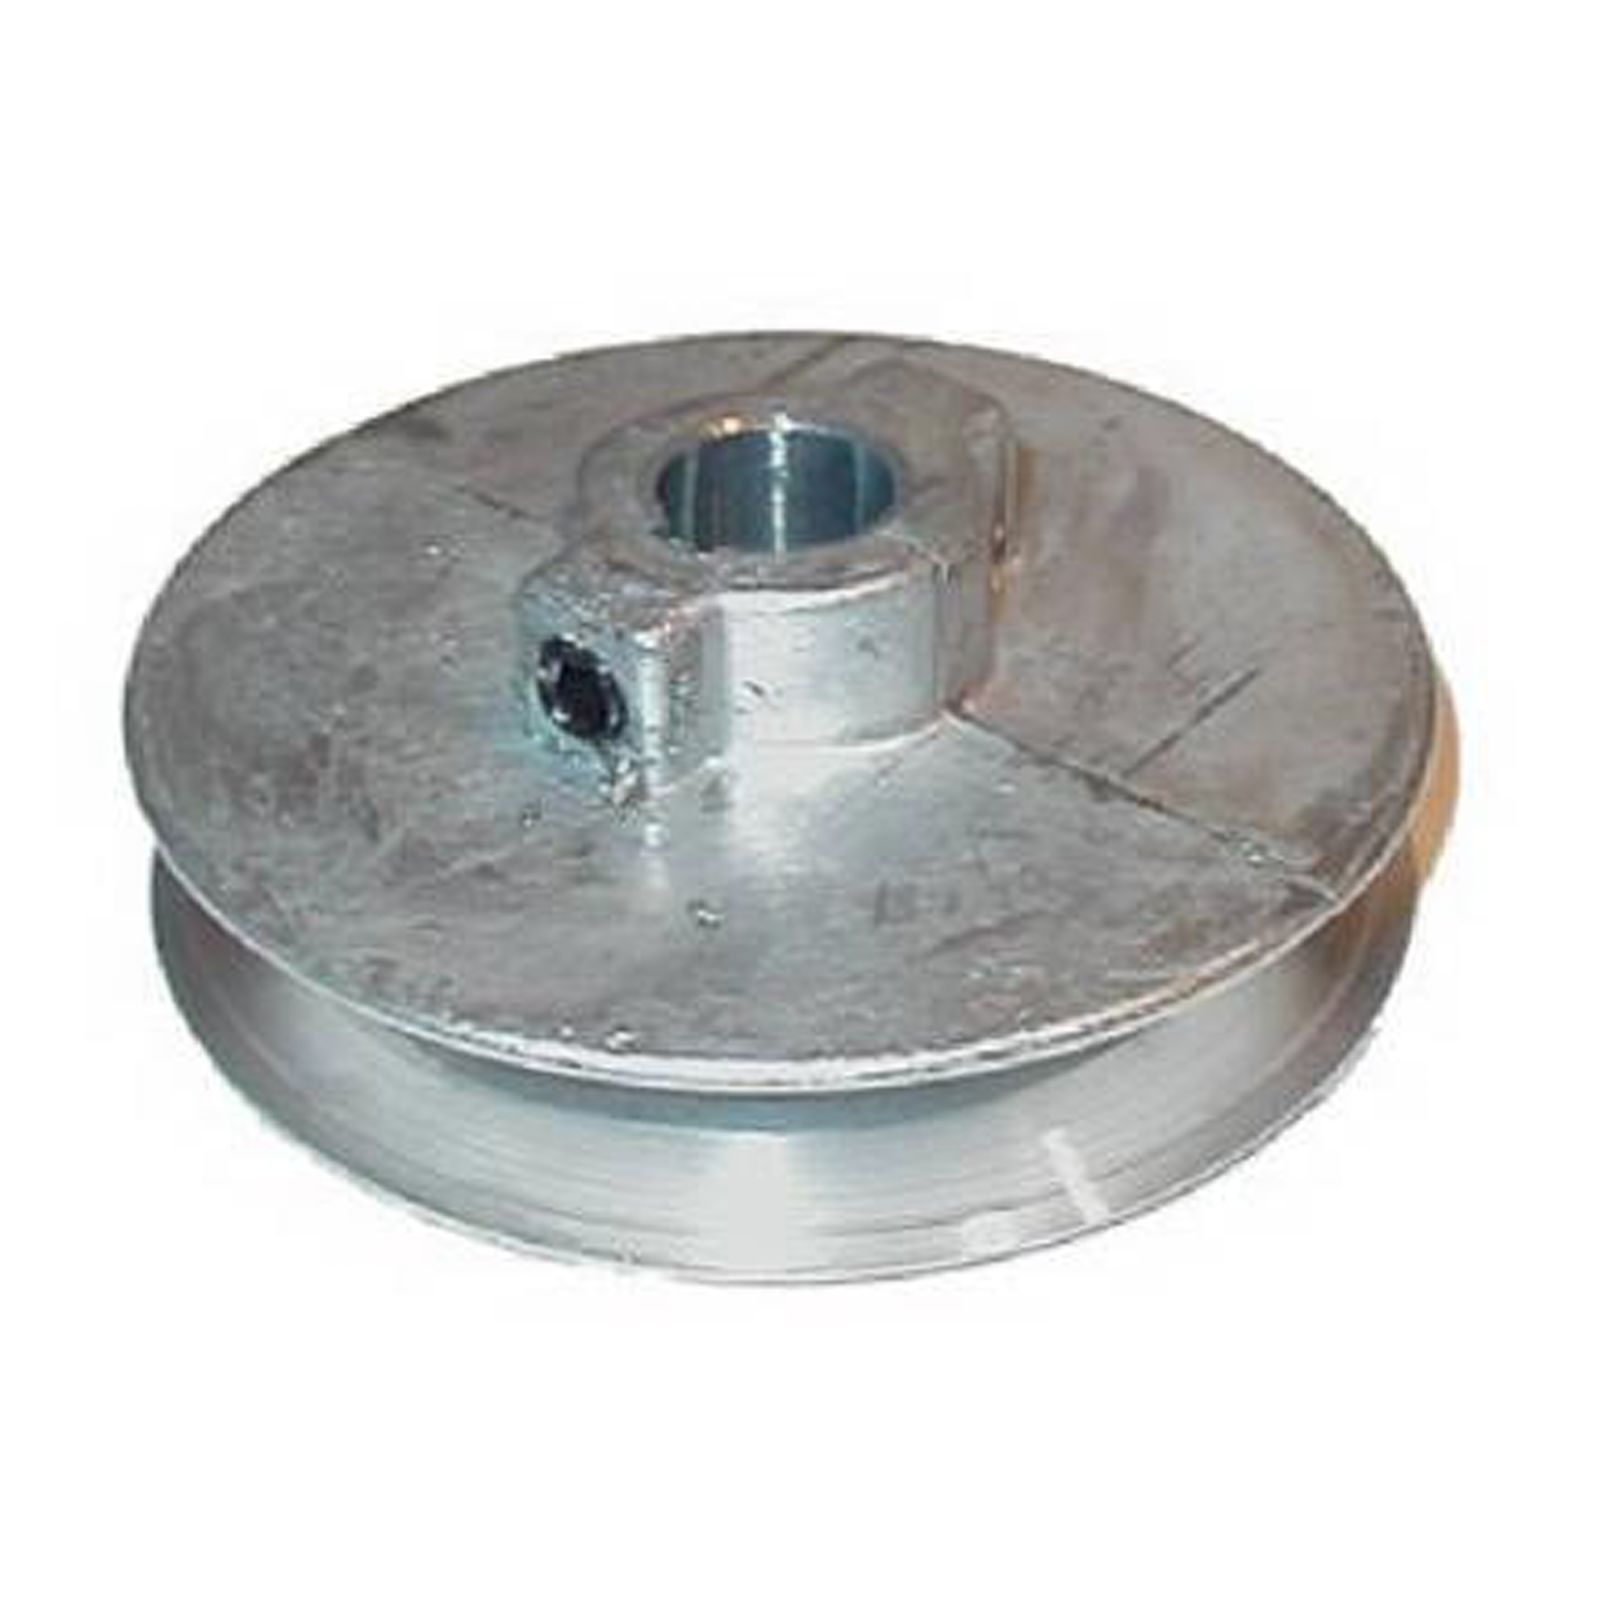 Chicago Die Cast 4 in. D Zinc Single V Grooved Pulley - image 1 of 3